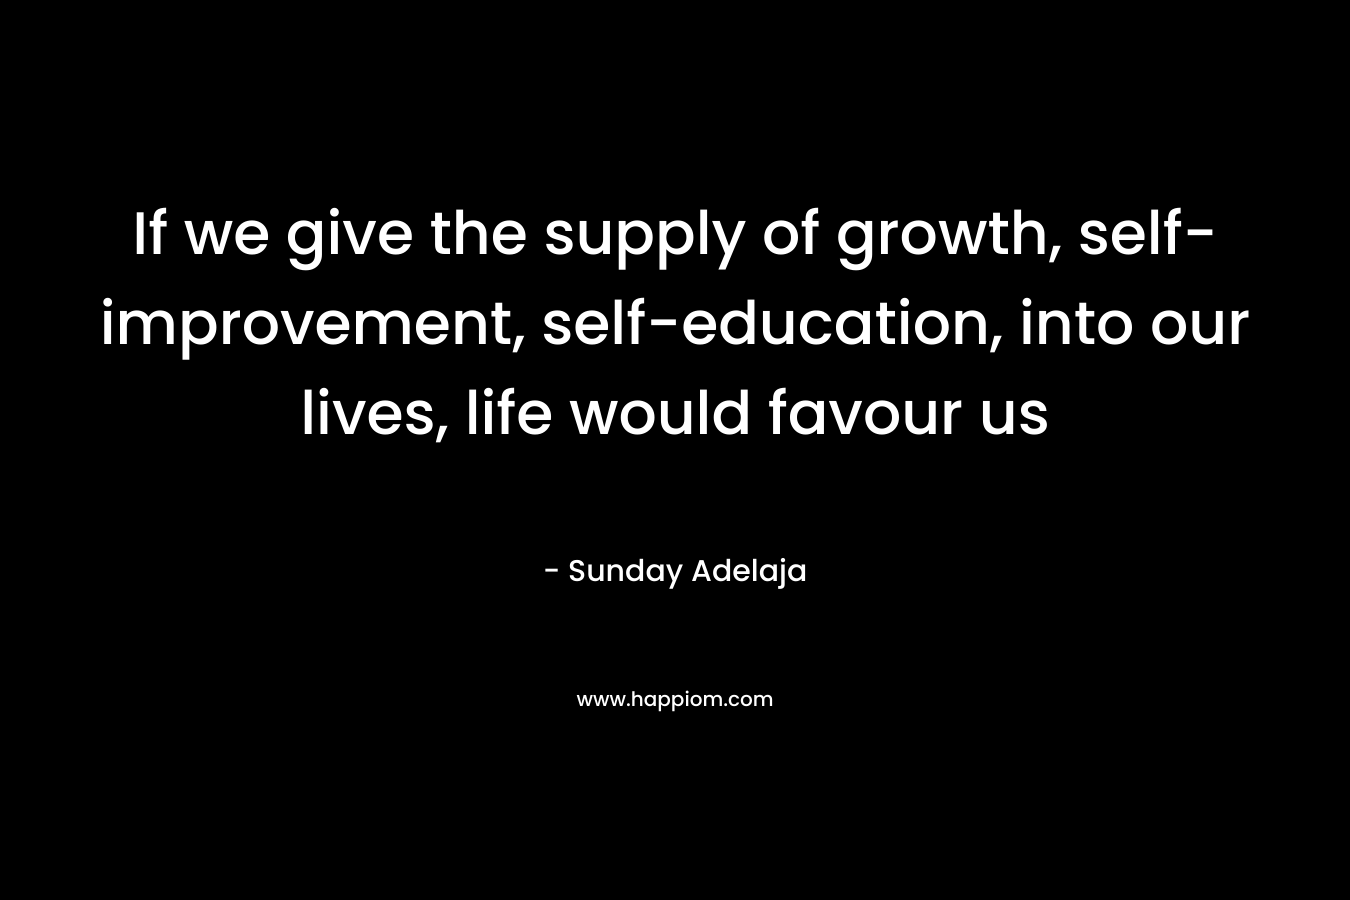 If we give the supply of growth, self-improvement, self-education, into our lives, life would favour us